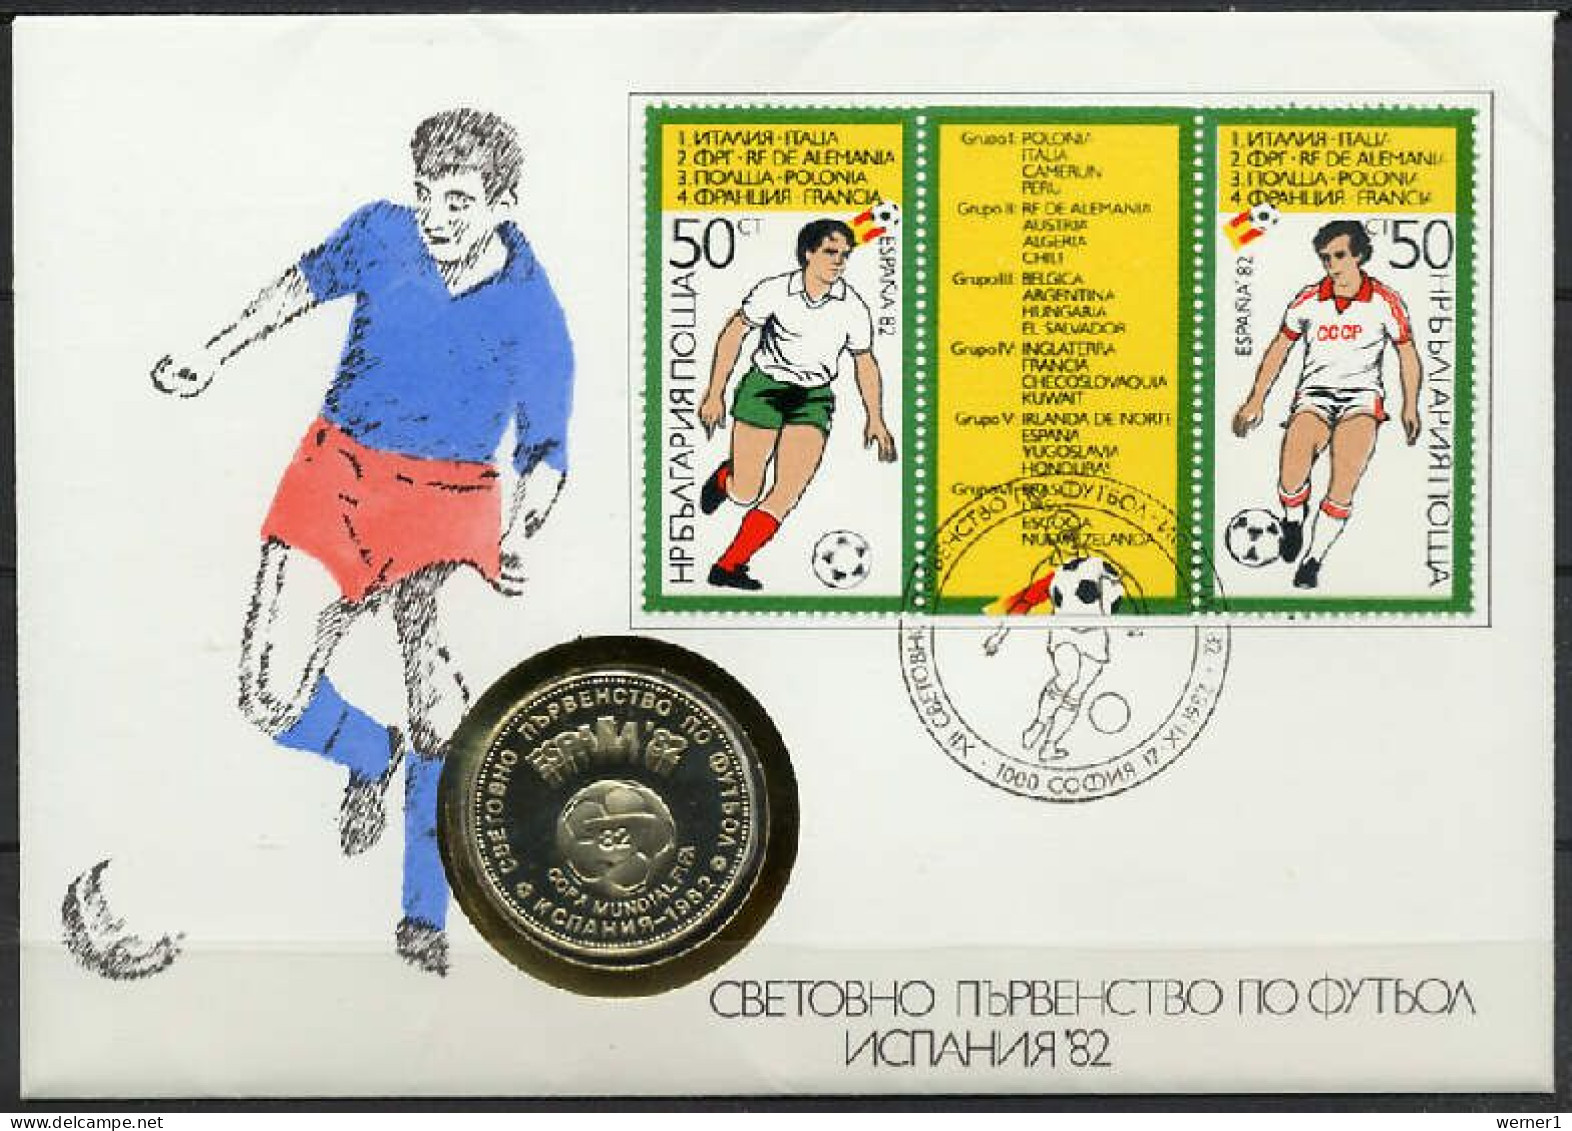 Bulgaria 1982 Football Soccer World Cup Numismatic Cover With 2 Lewa Coin And 2 Stamps - 1982 – Spain